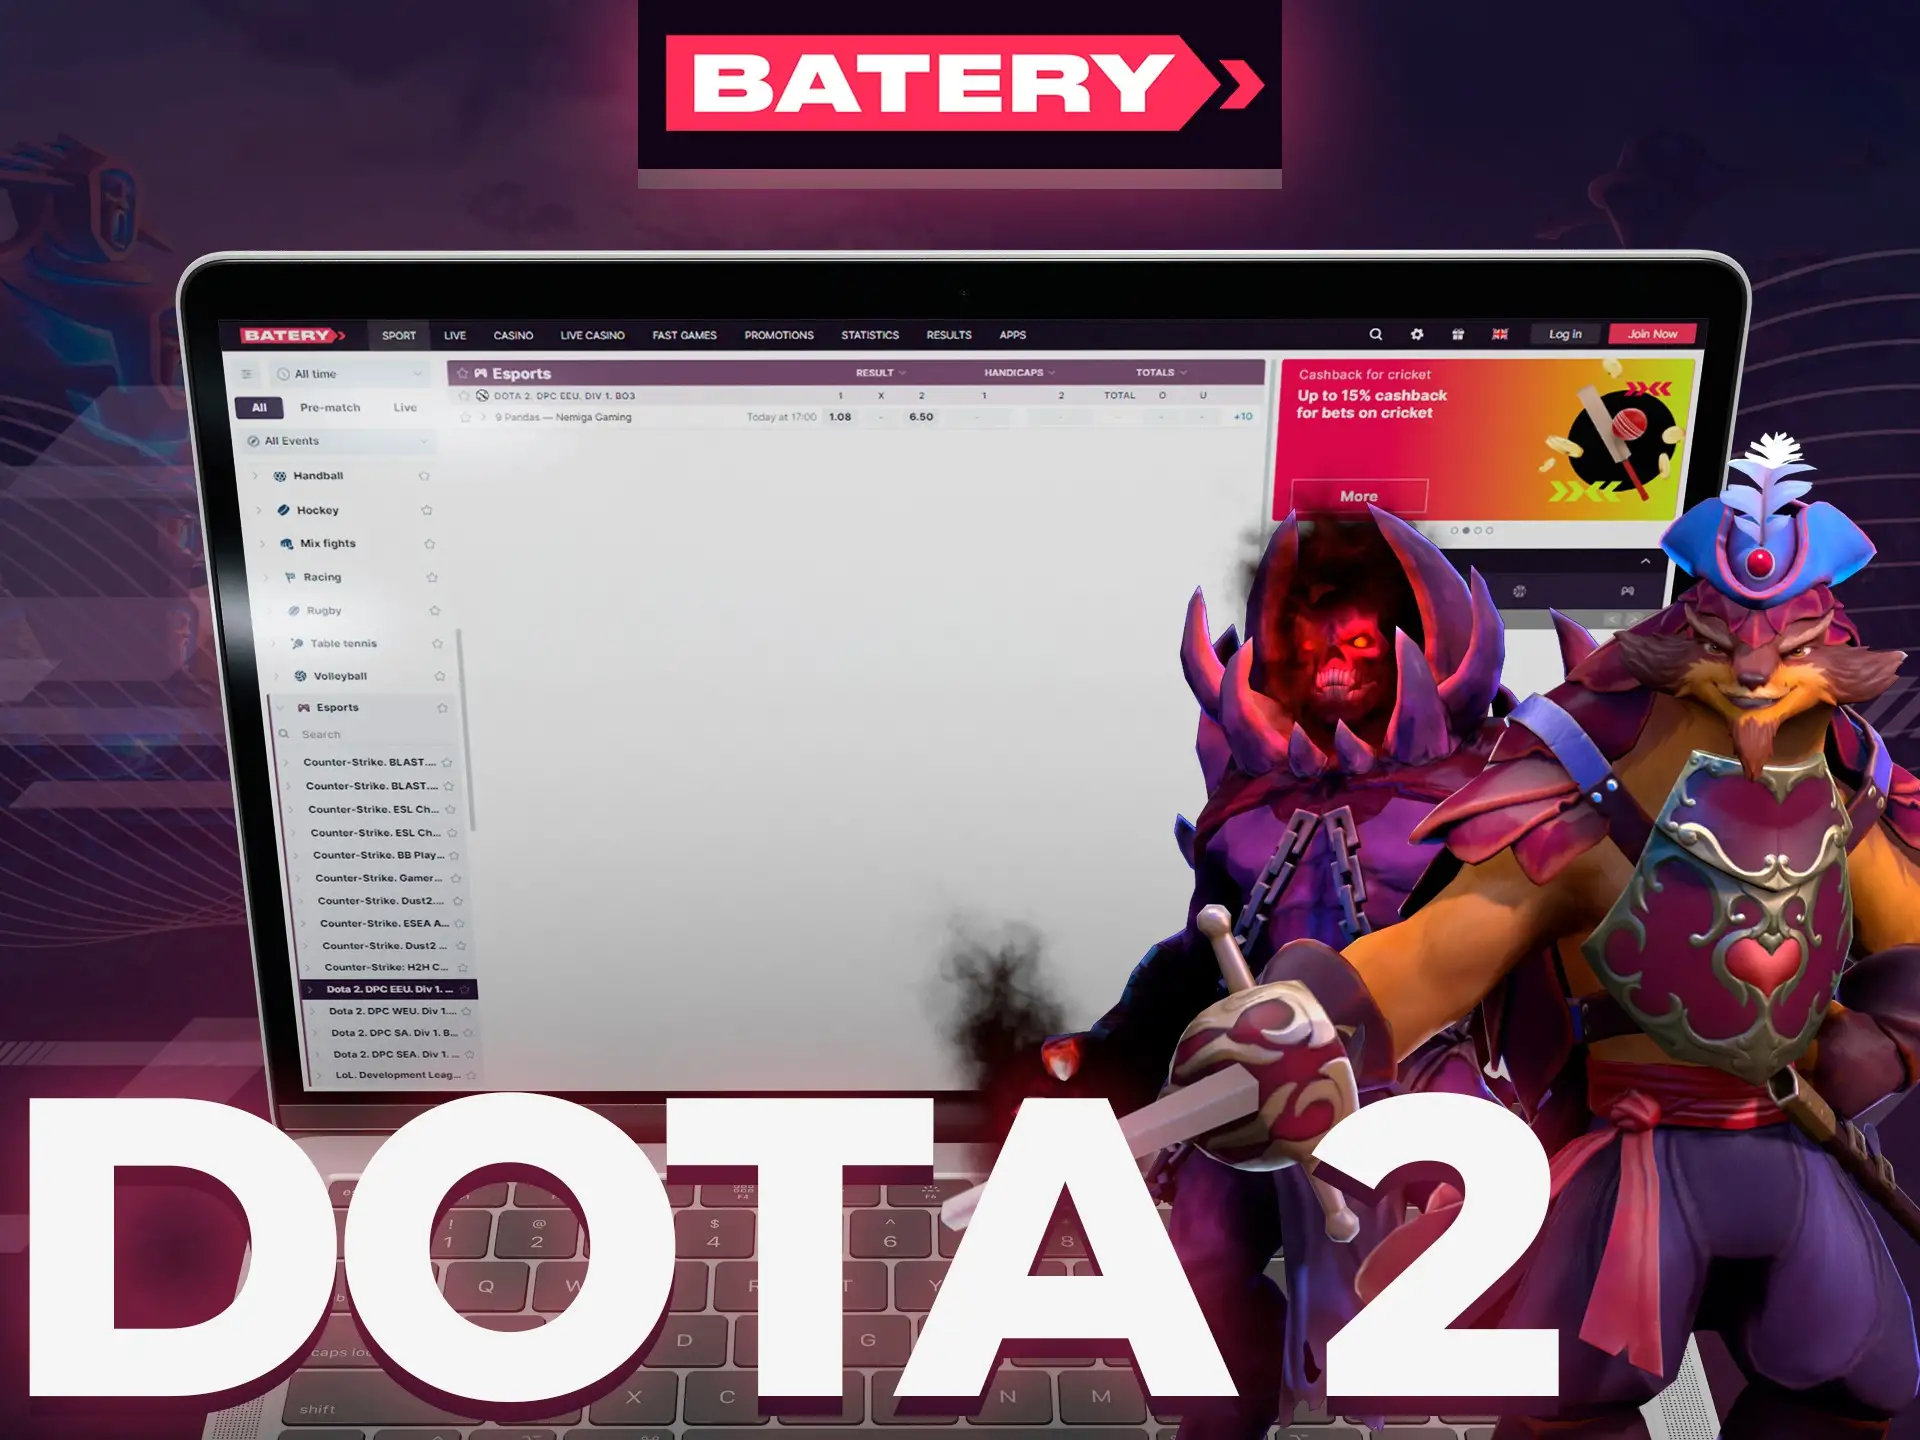 Watch most exciting games on Dota 2 at Batery.